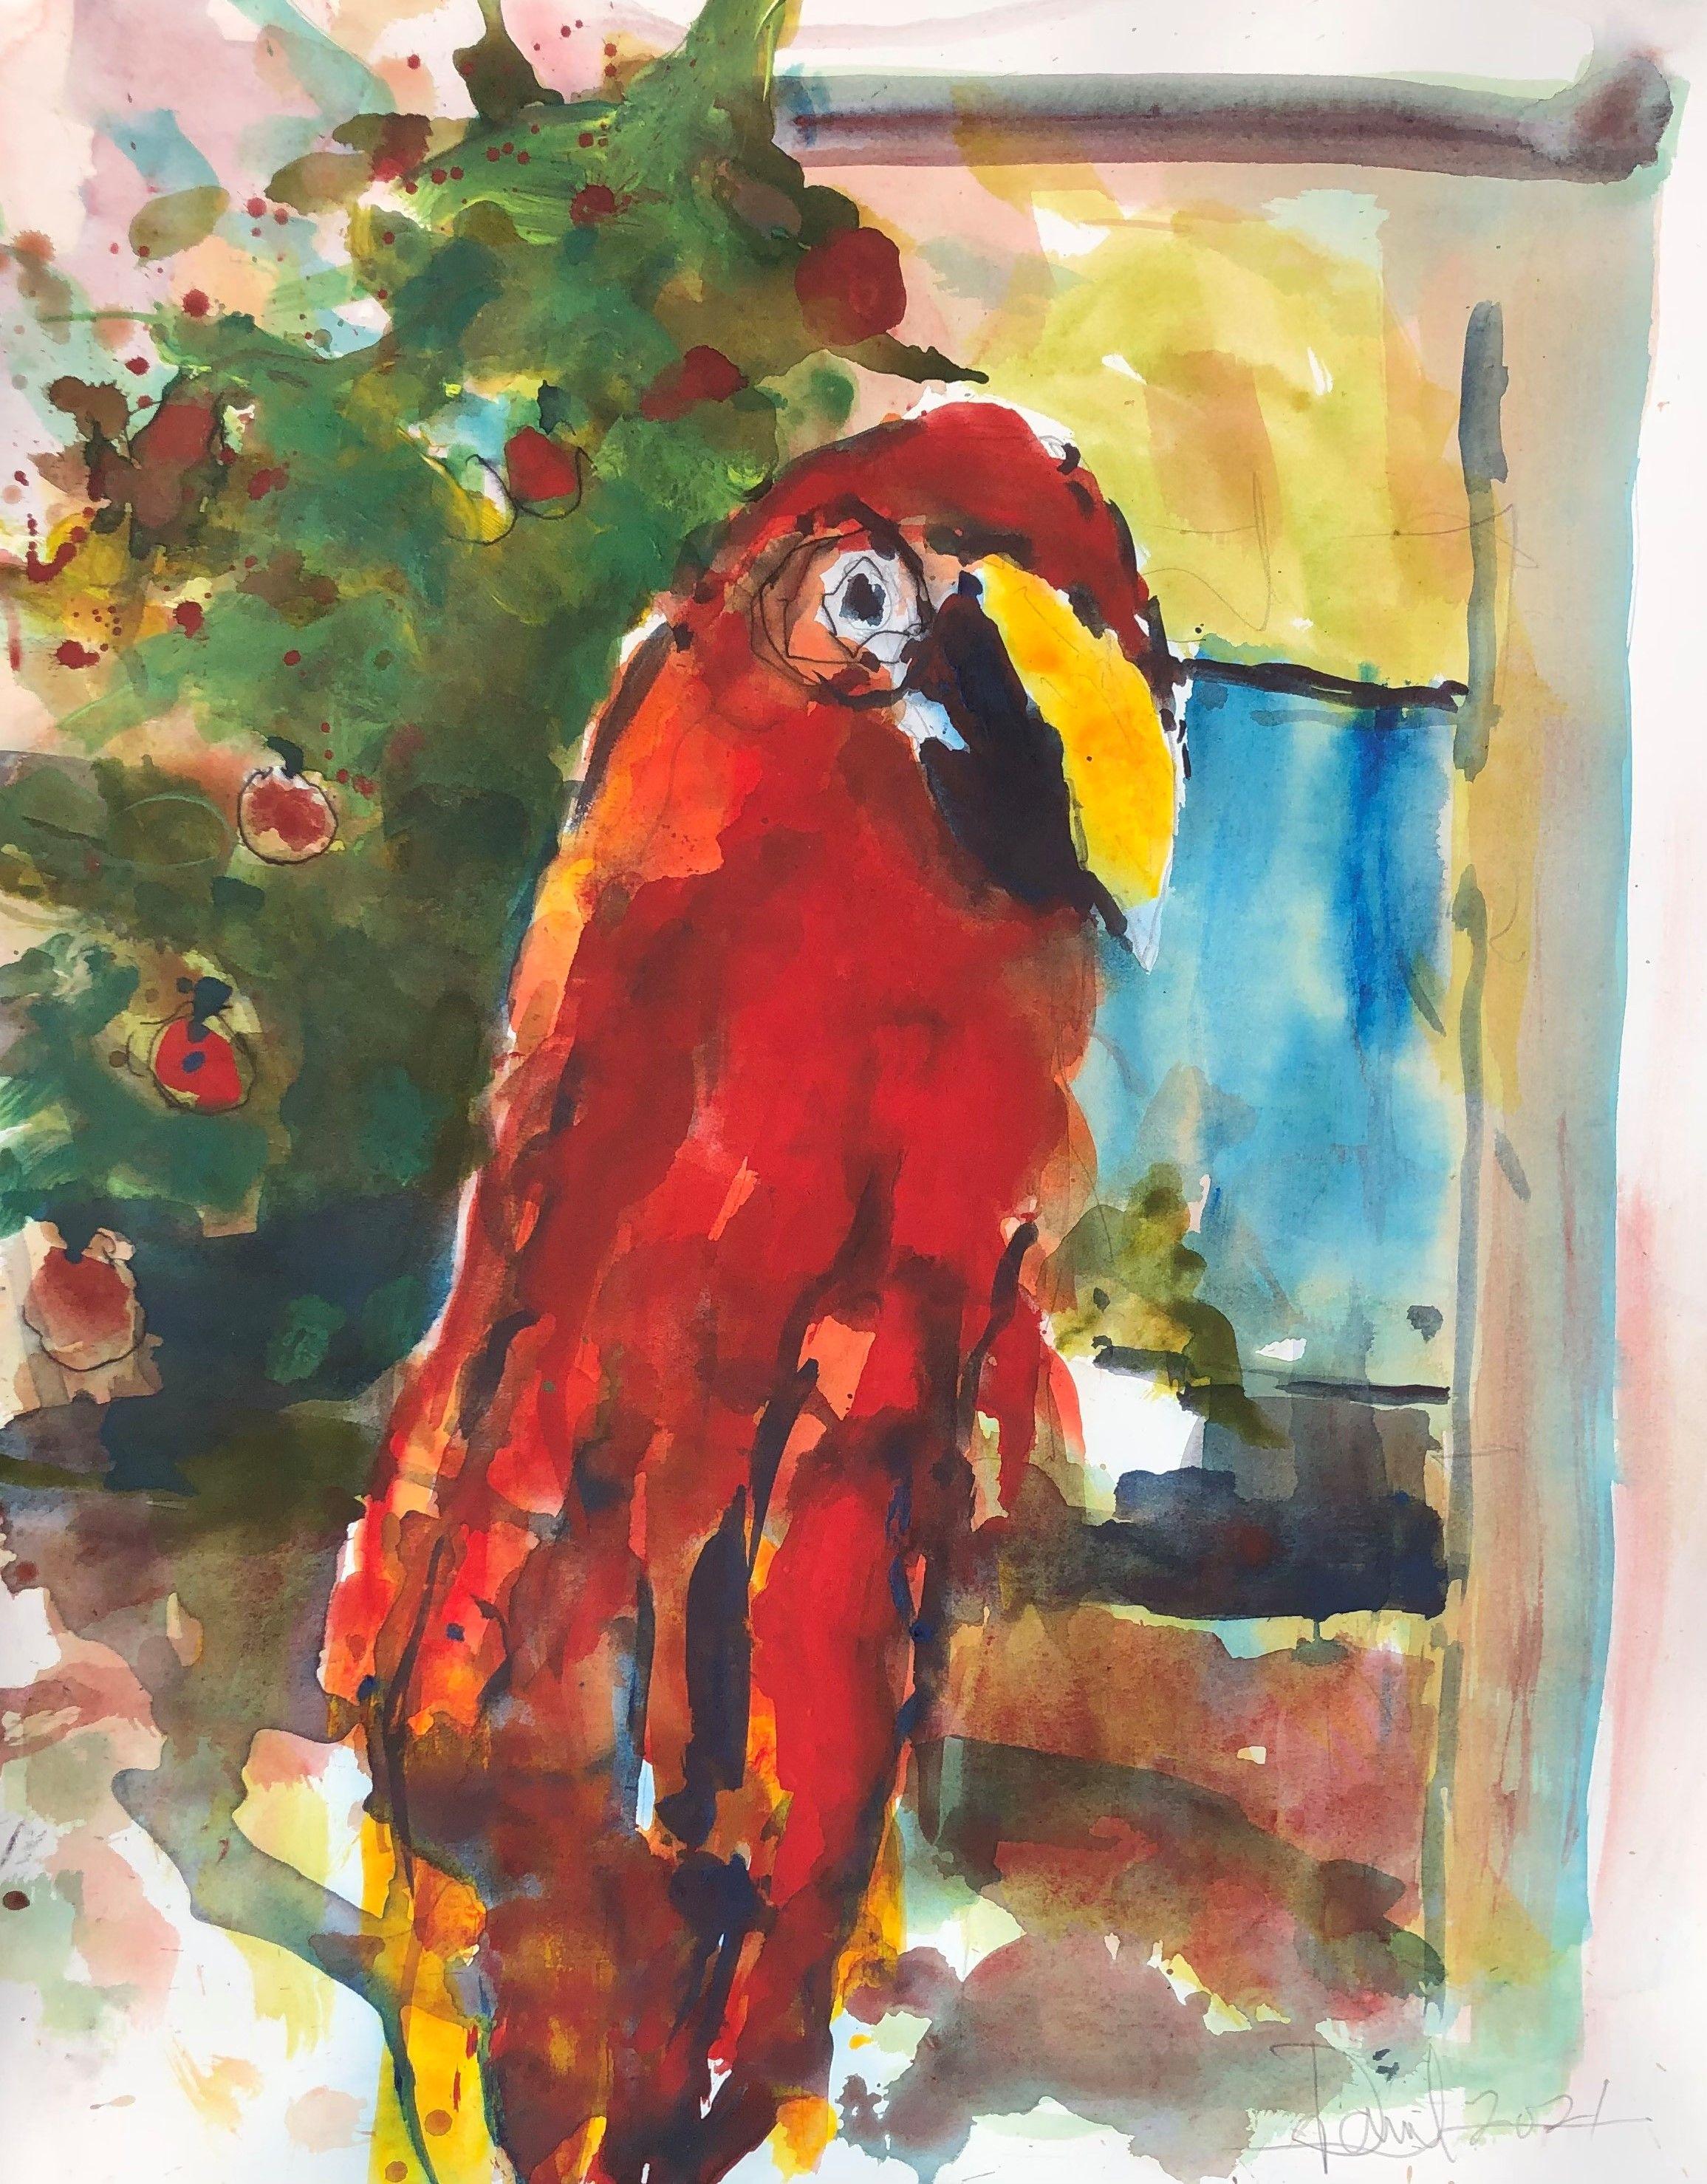 The Magic Macaw, Painting, Watercolor on Watercolor Paper - Art by Daniel Clarke